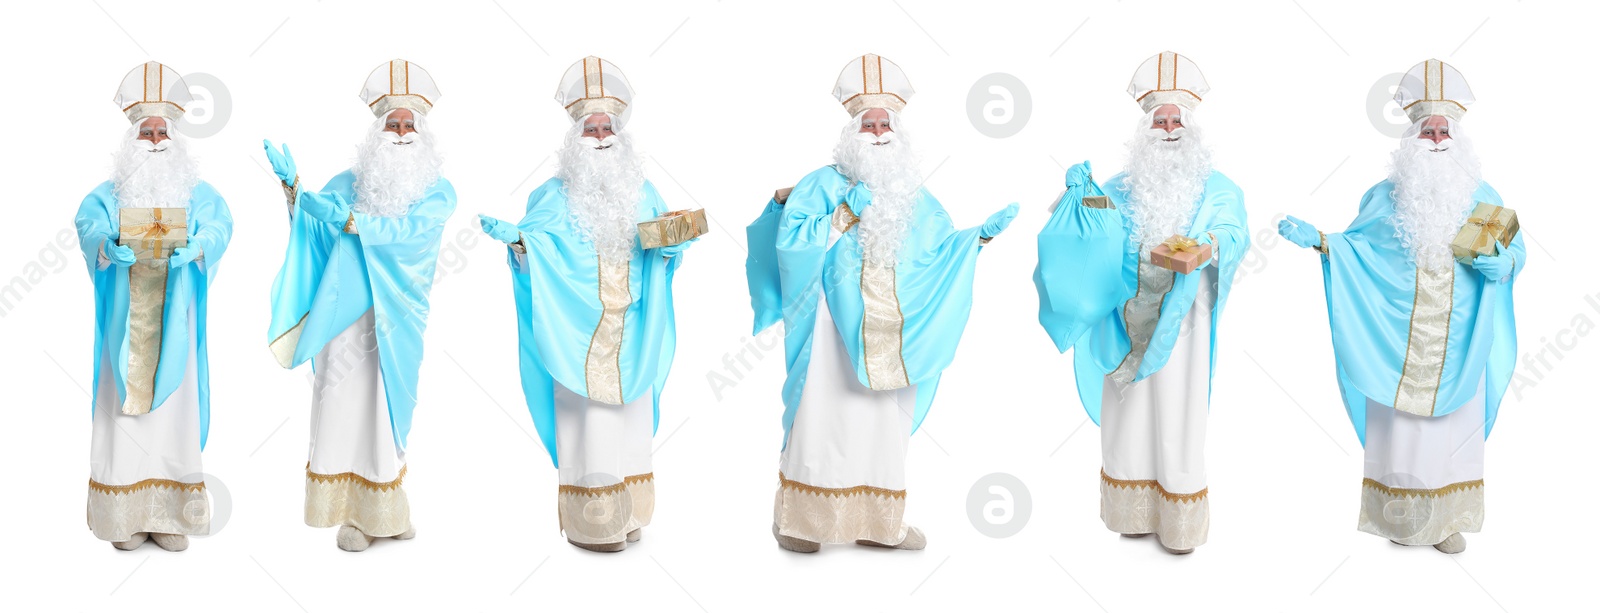 Image of Collage with photos of Saint Nicholas on white background. Banner design